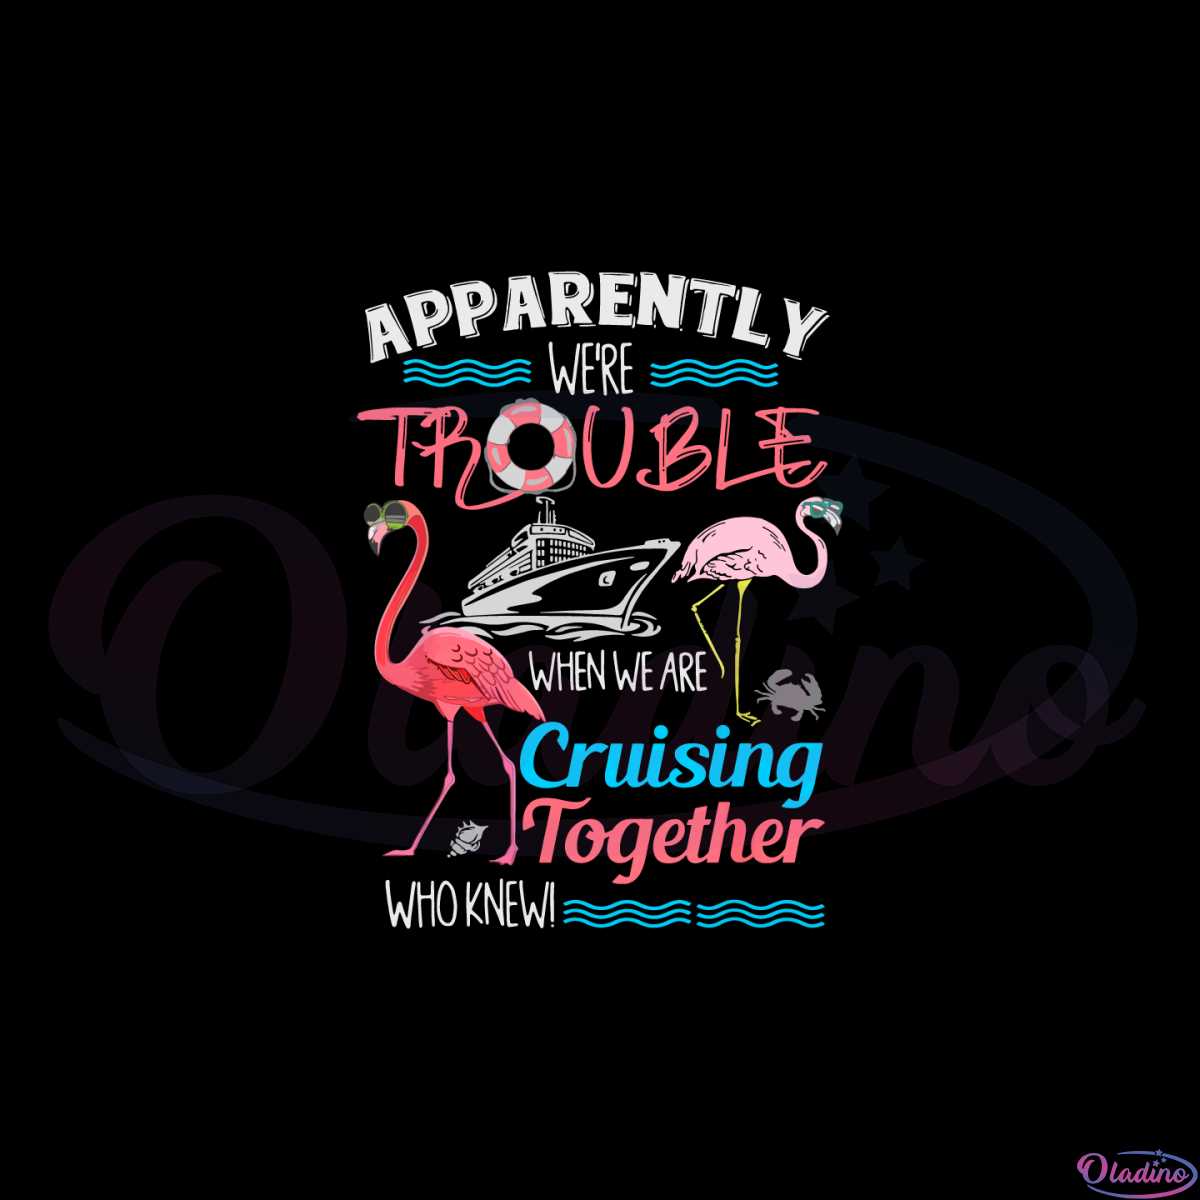 apparently-were-trouble-when-we-are-cruising-together-svg